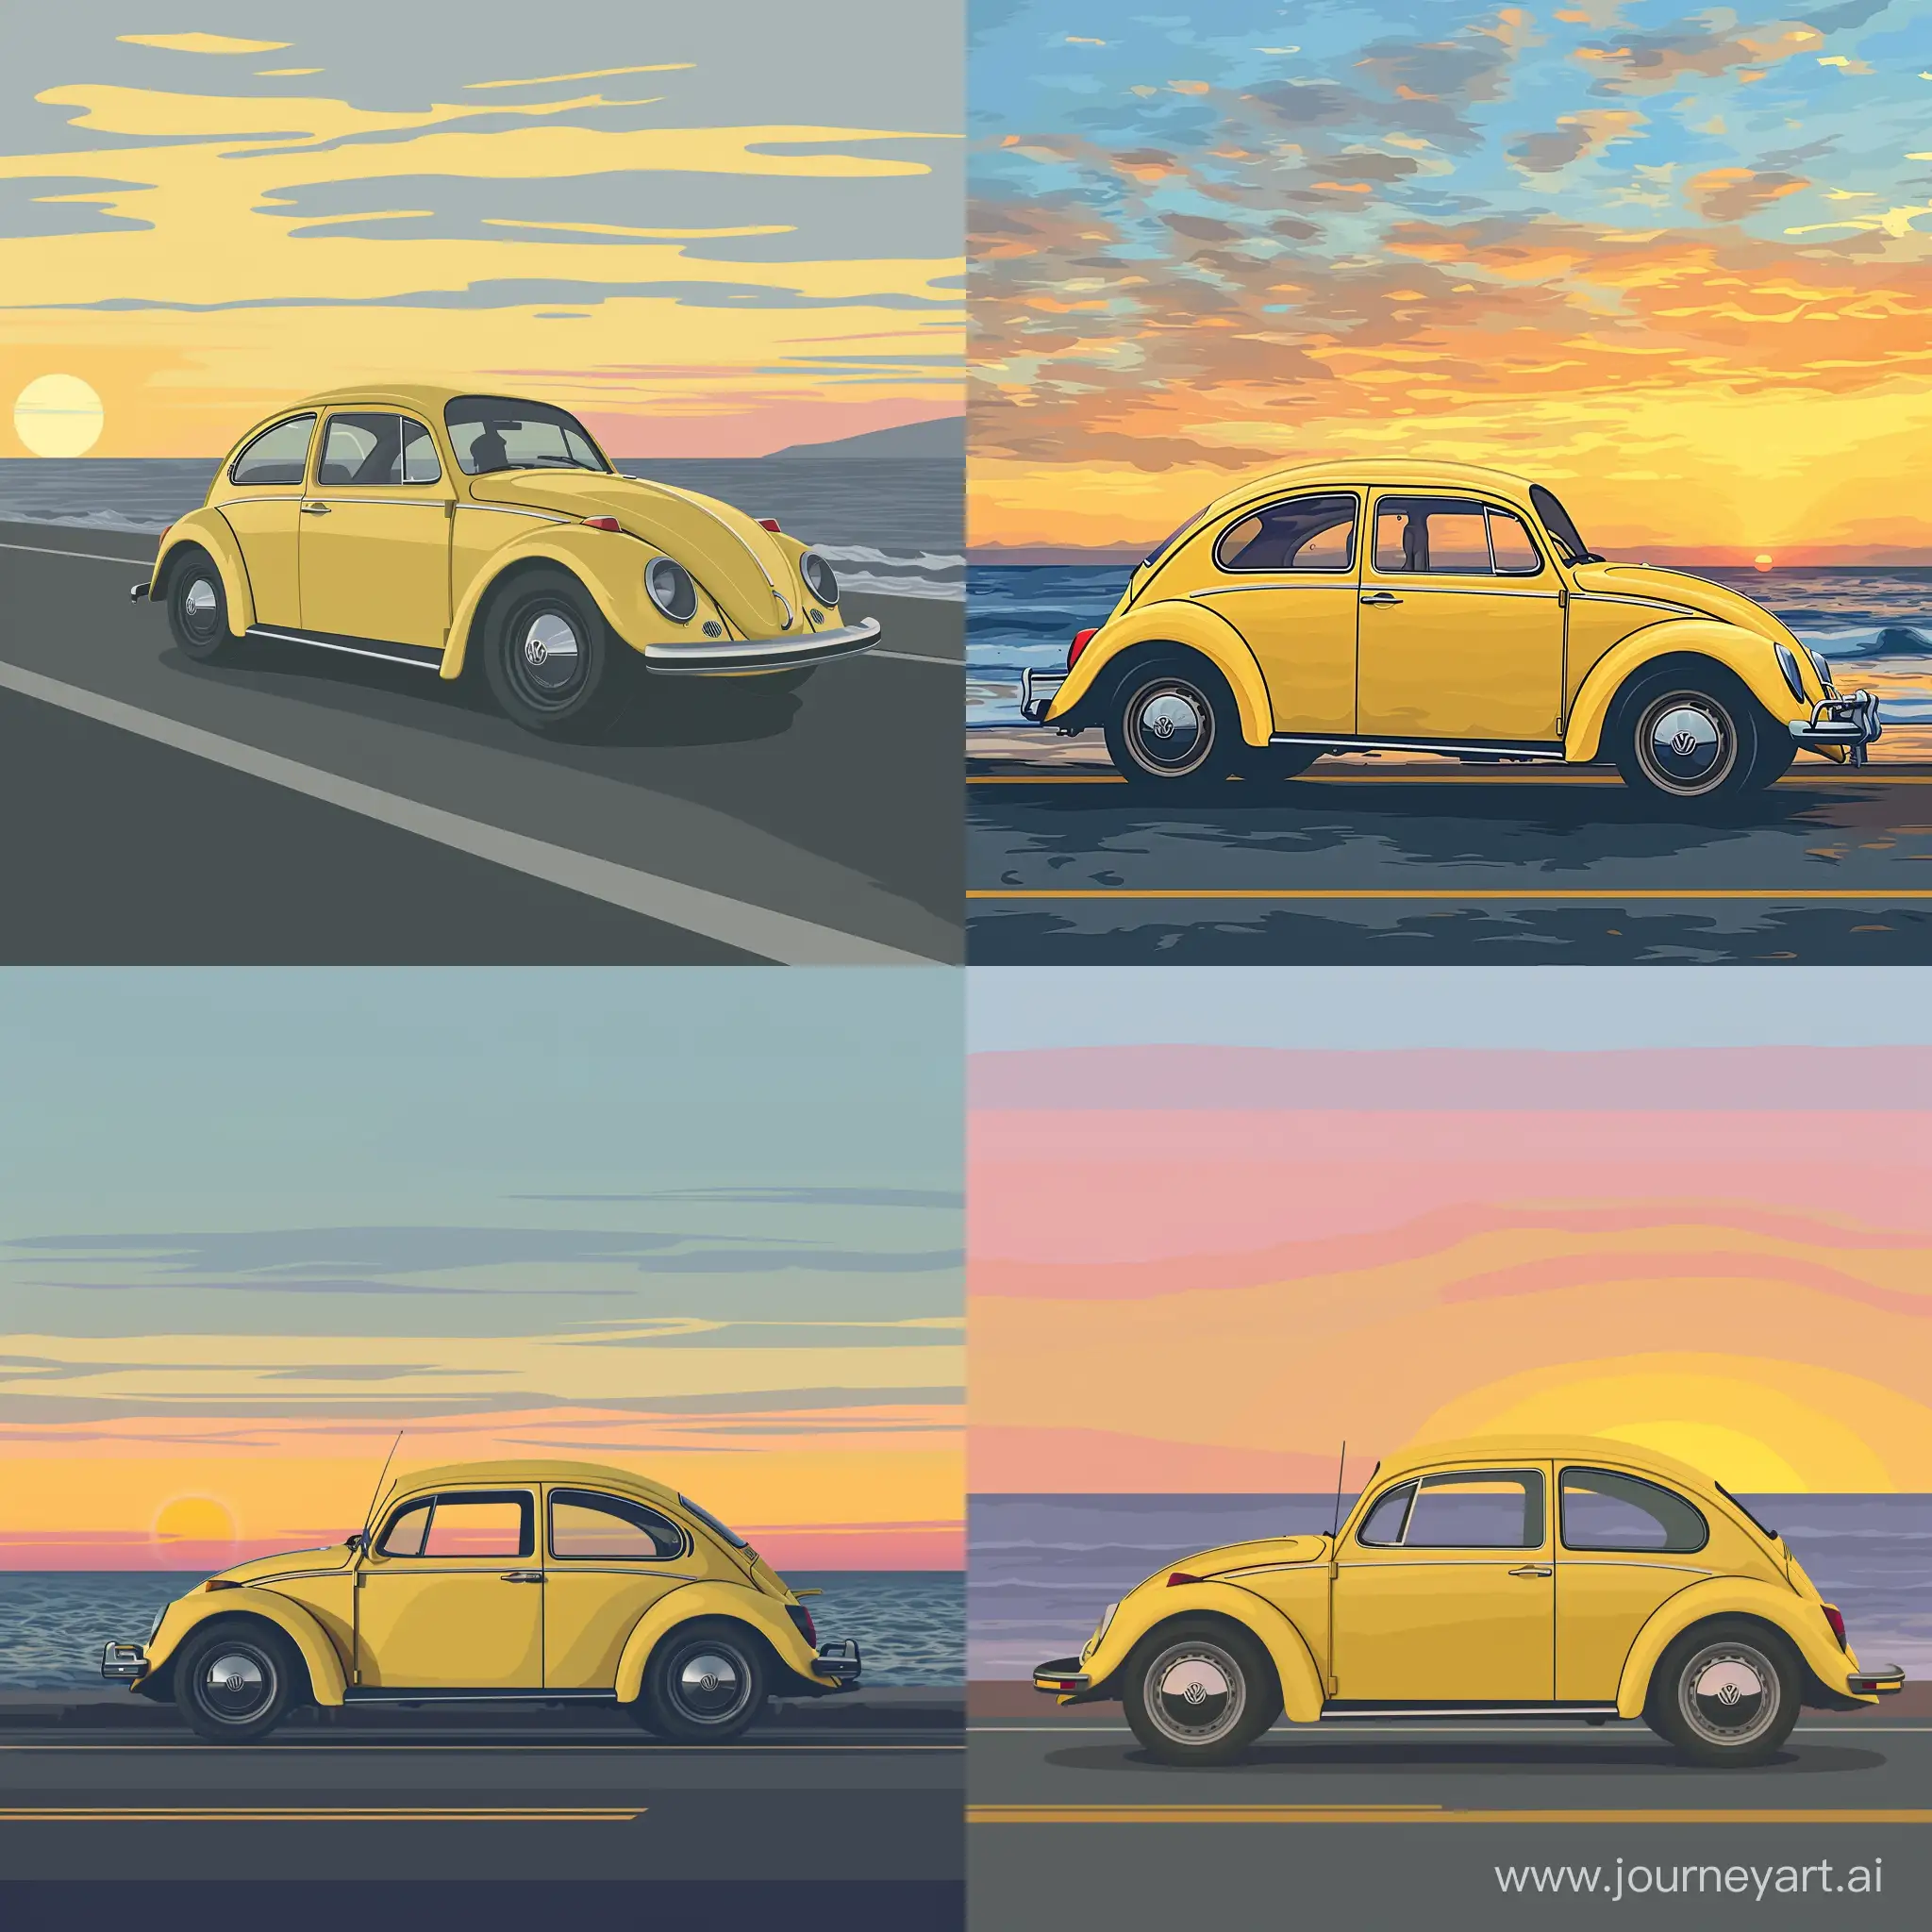 A yellow Volkswagen beetle travelling on the road by the sea, sunset behind,in flat style